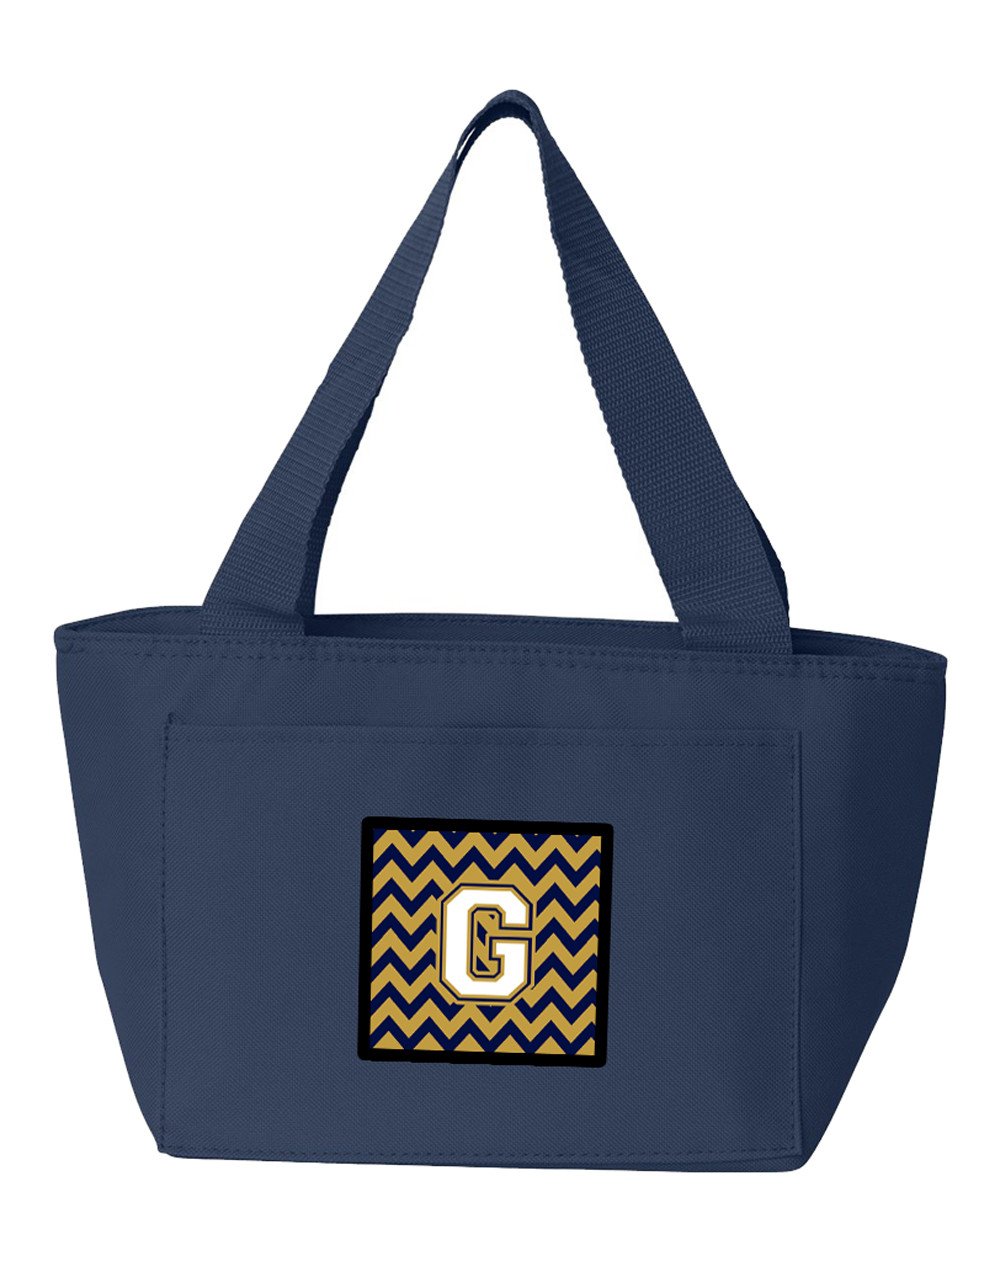 Letter G Chevron Navy Blue and Gold Lunch Bag CJ1057-GNA-8808 by Caroline's Treasures